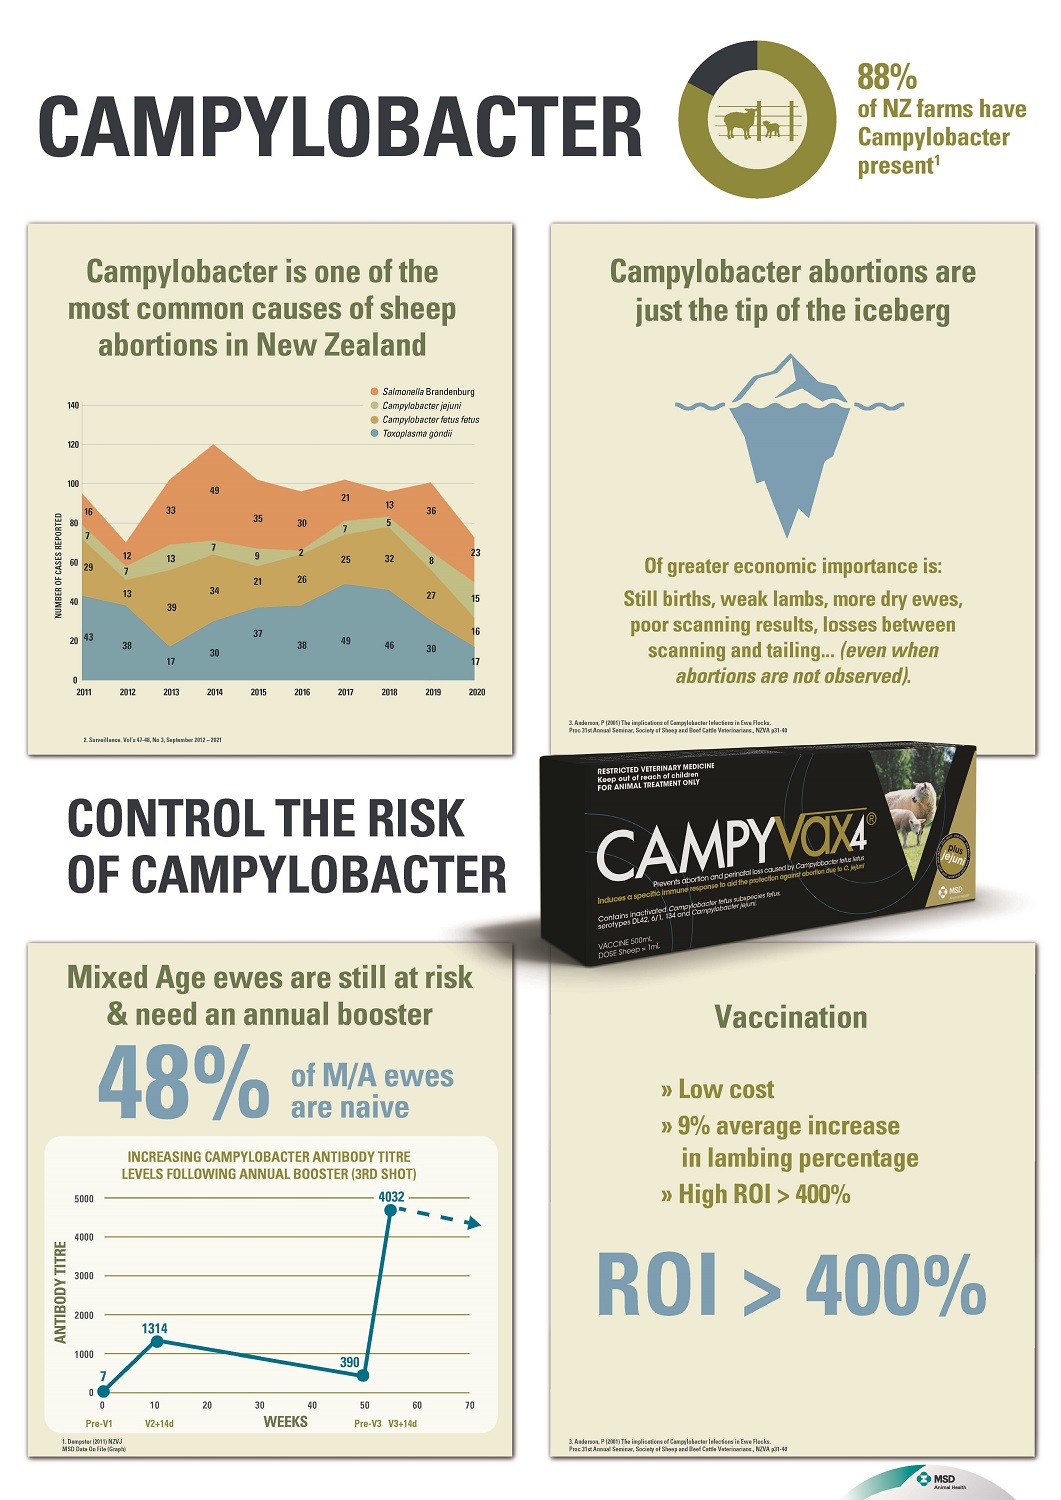 Key facts about Campylobacter in sheep in New Zealand